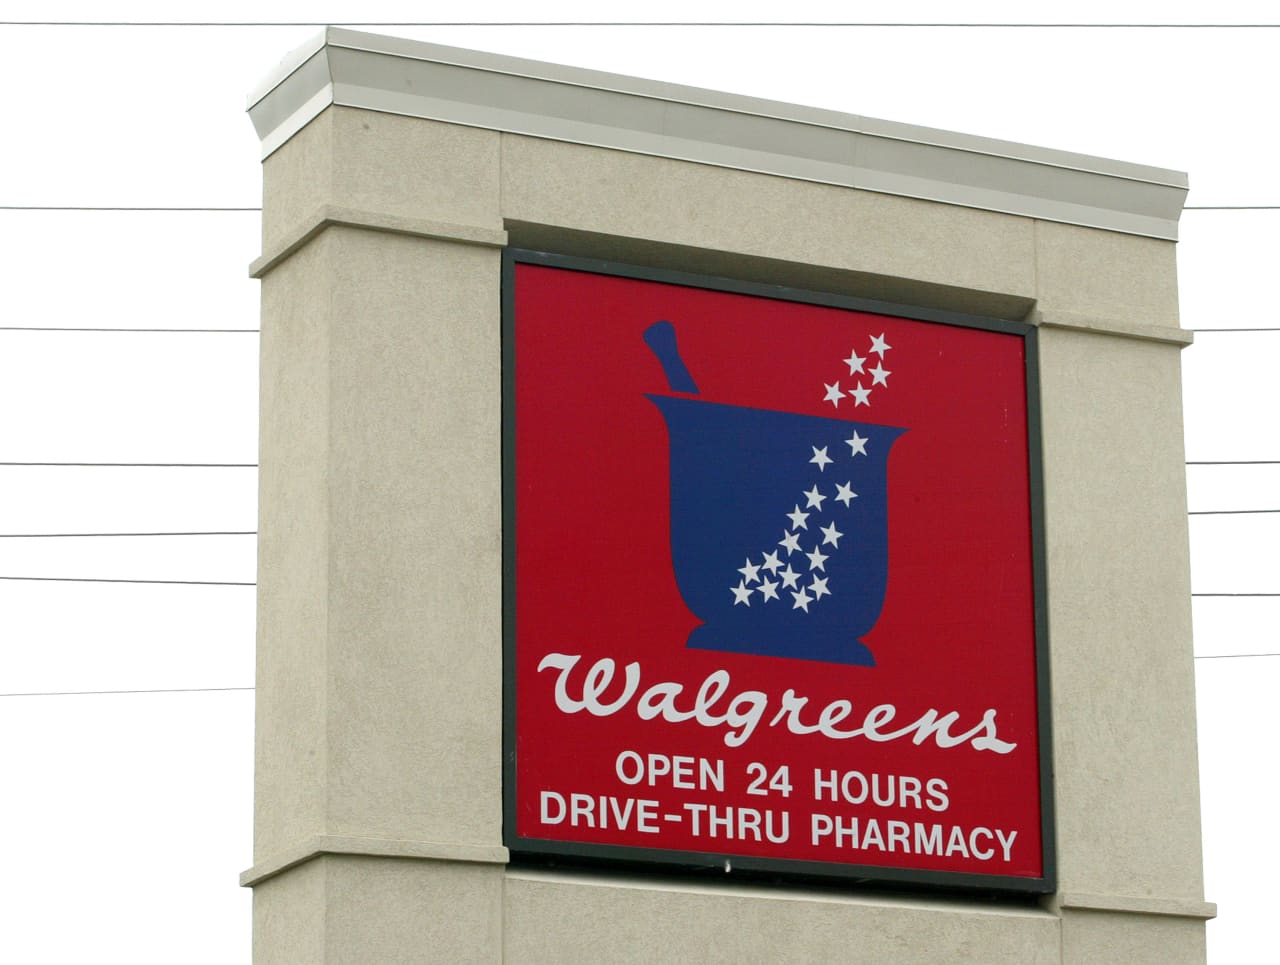 Walgreens books a $5.8 billion charge, sees challenging retail environment